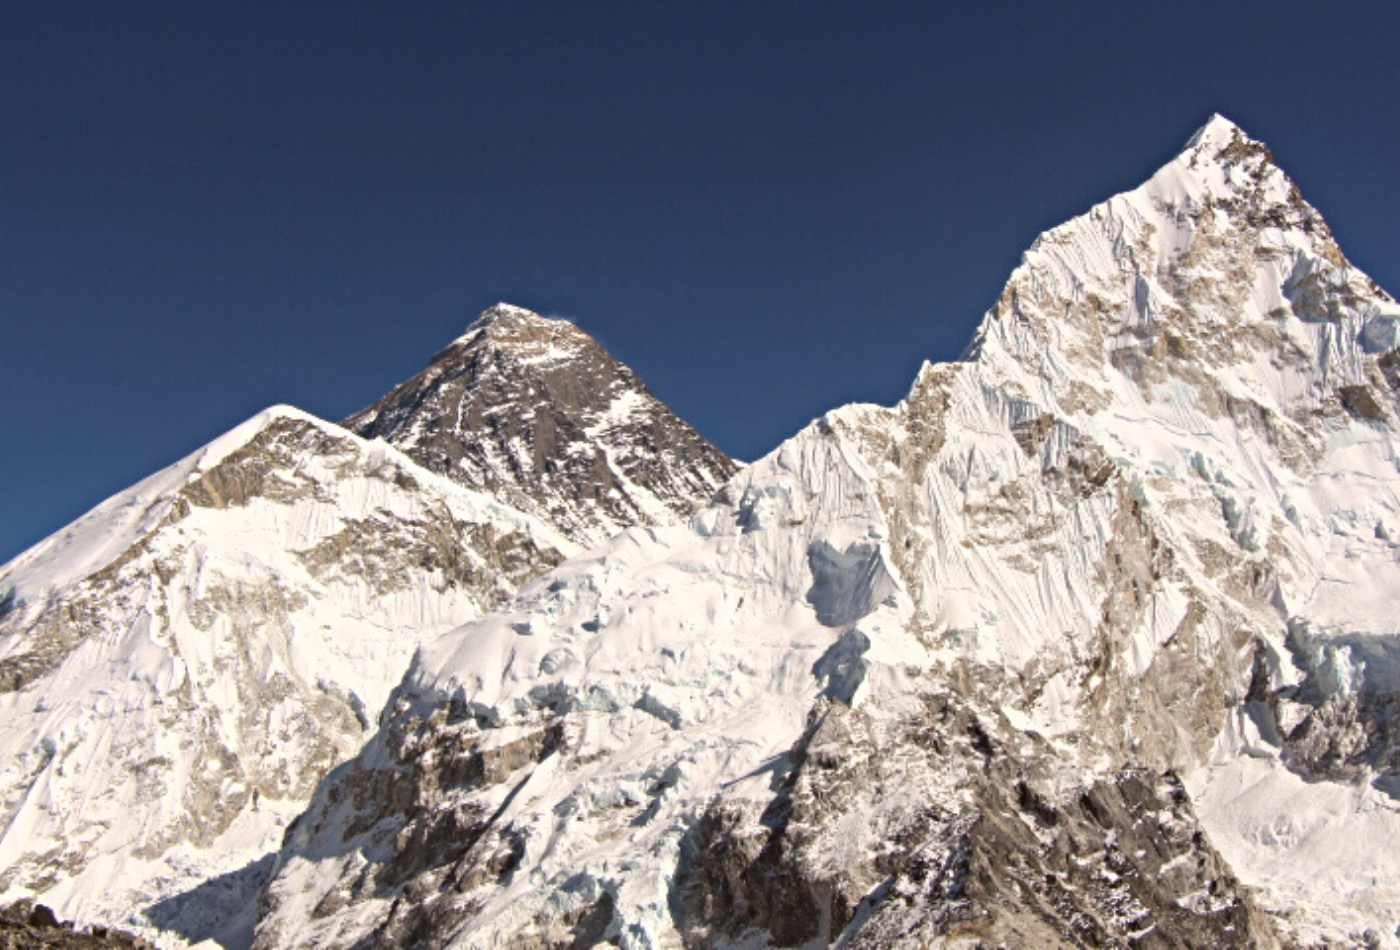 A stunning view of Mt. Everest and Nuptse peak is seen from Kalapatthar. The snow-covered mountain peaks rise high into the sky.